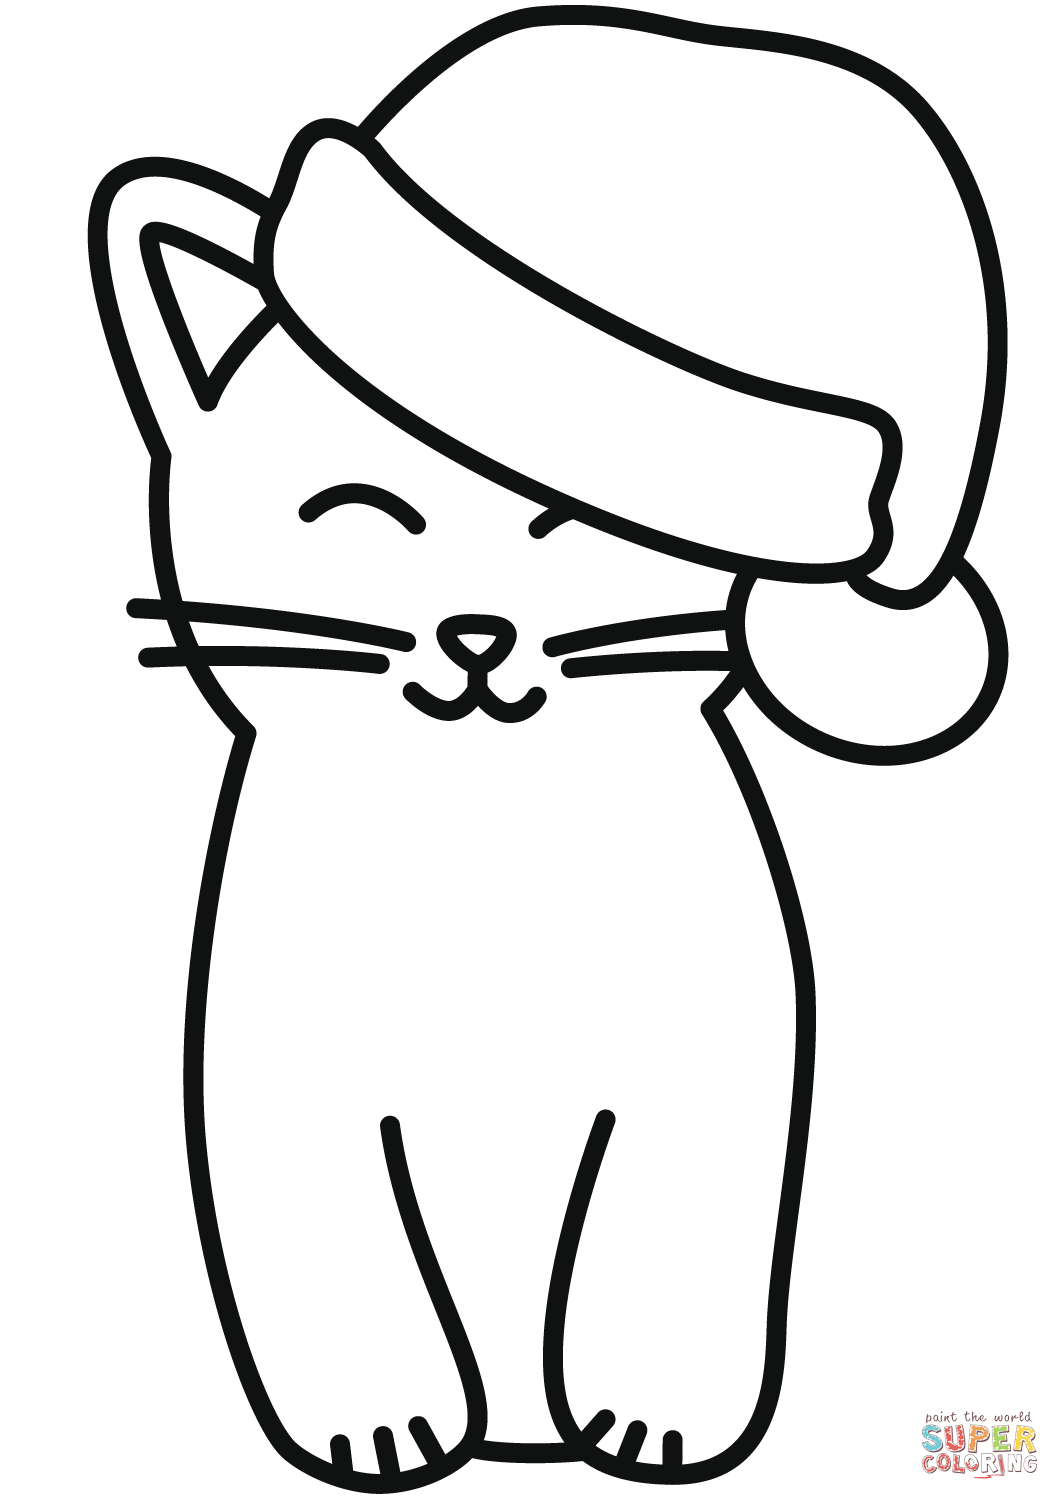 Cat In The Hat Coloring Page Christmas Cat In The Hat Coloring Page Free Printable Coloring Pages